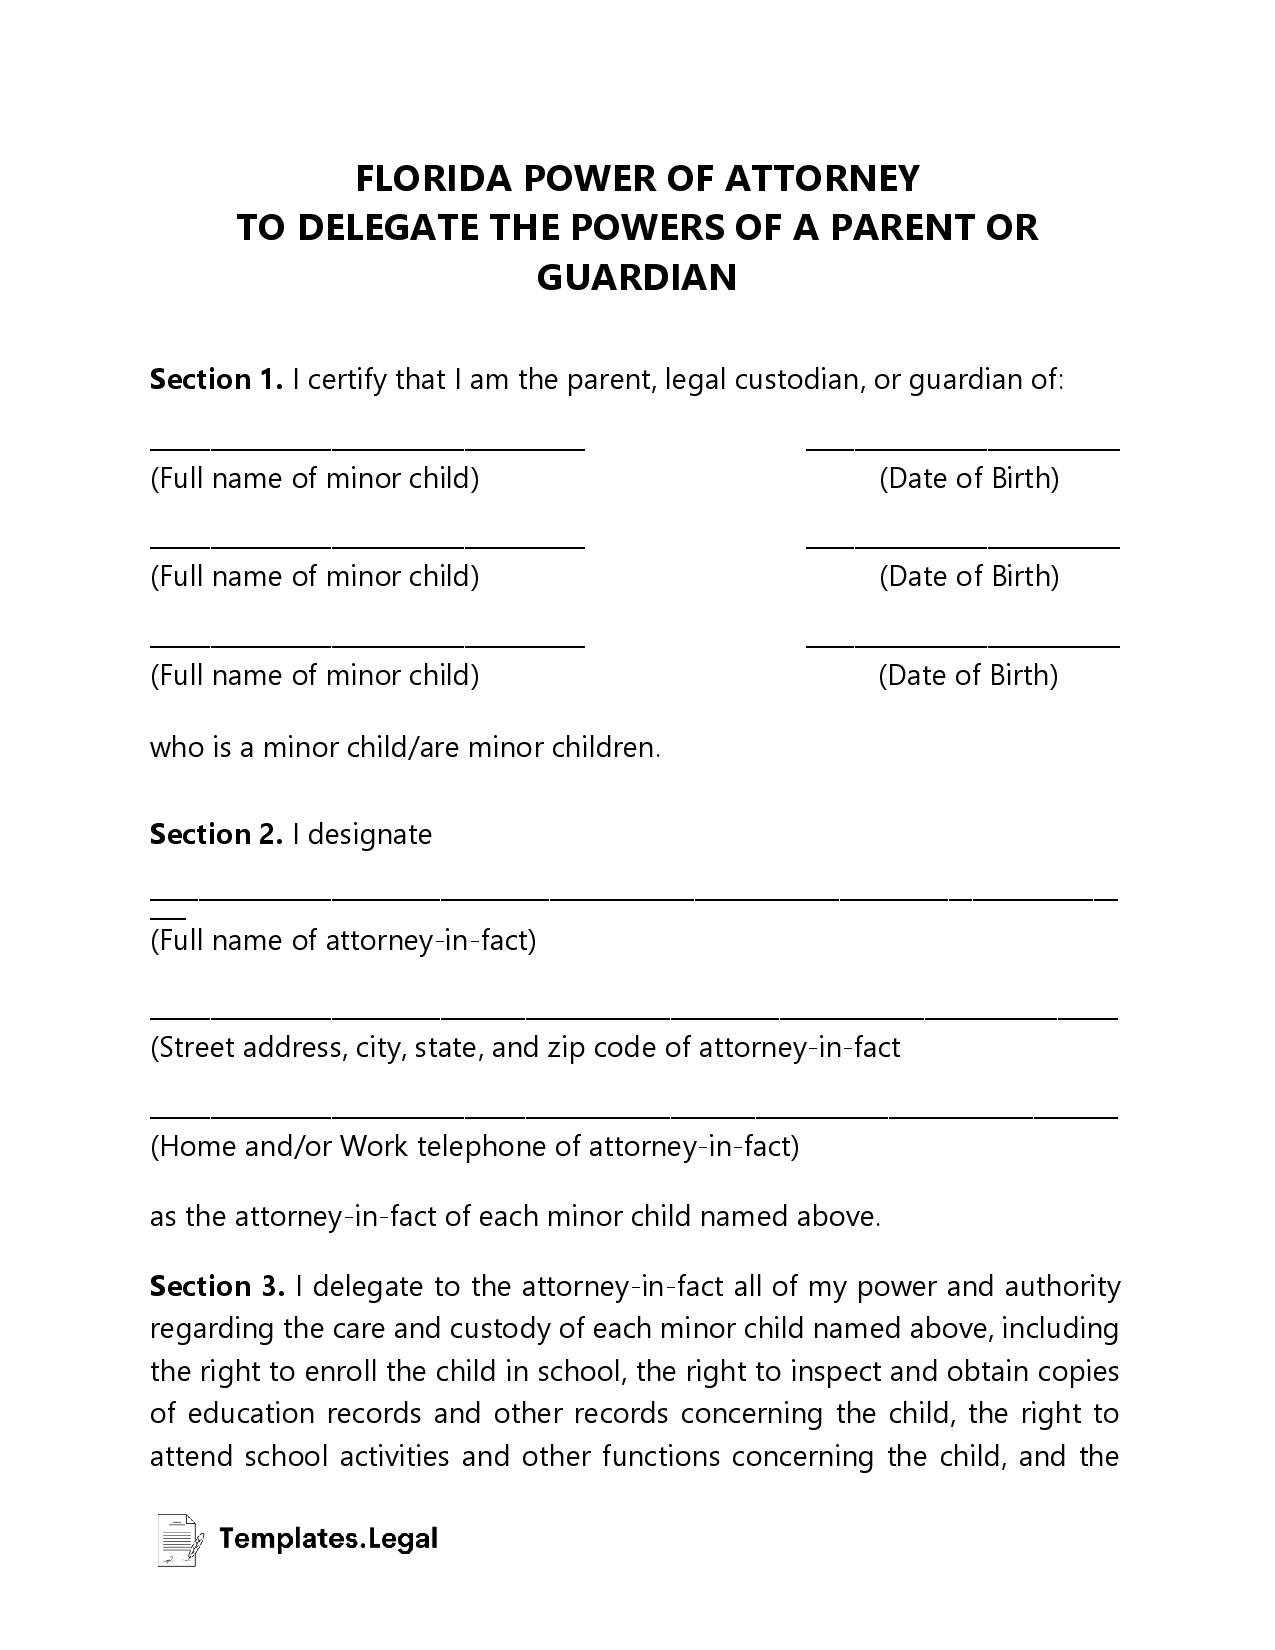 Florida Minor (Child) Power of Attorney - Templates.Legal